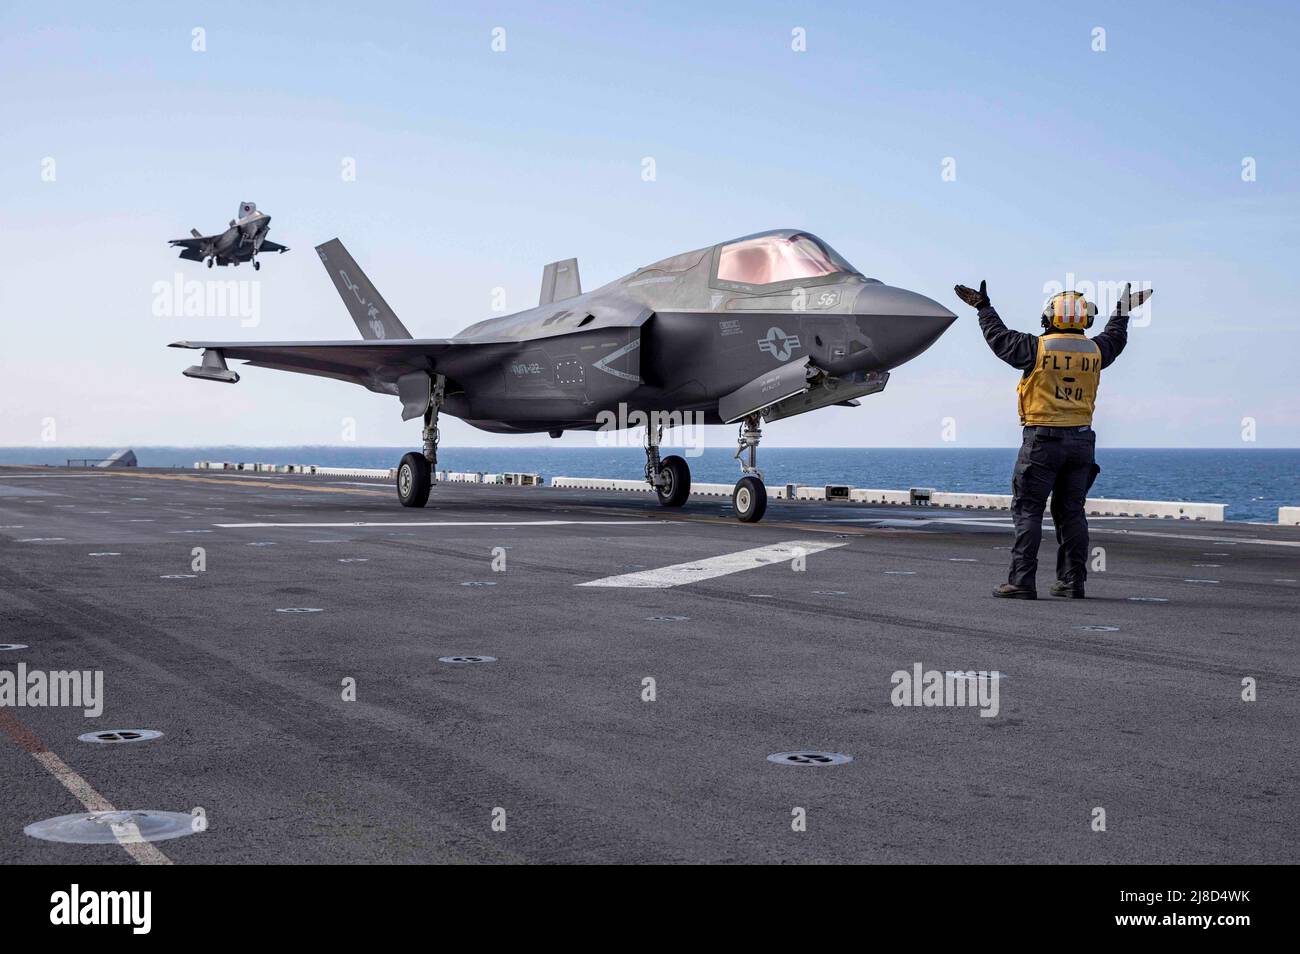 U.S. Navy Aviation Boatswains Mate 1st Class Jenna Leggett directs a U.S. Marine Corps F-35B Lightning II fighter aircraft, attached to the Knightriders of Marine Medium Tiltrotor Squadron 164, after landing on the flight deck of the Wasp-class amphibious assault ship USS Makin Island during operation Northern Edge 2021, May 5, 2021 operating on the Gulf Of Alaska. Stock Photo